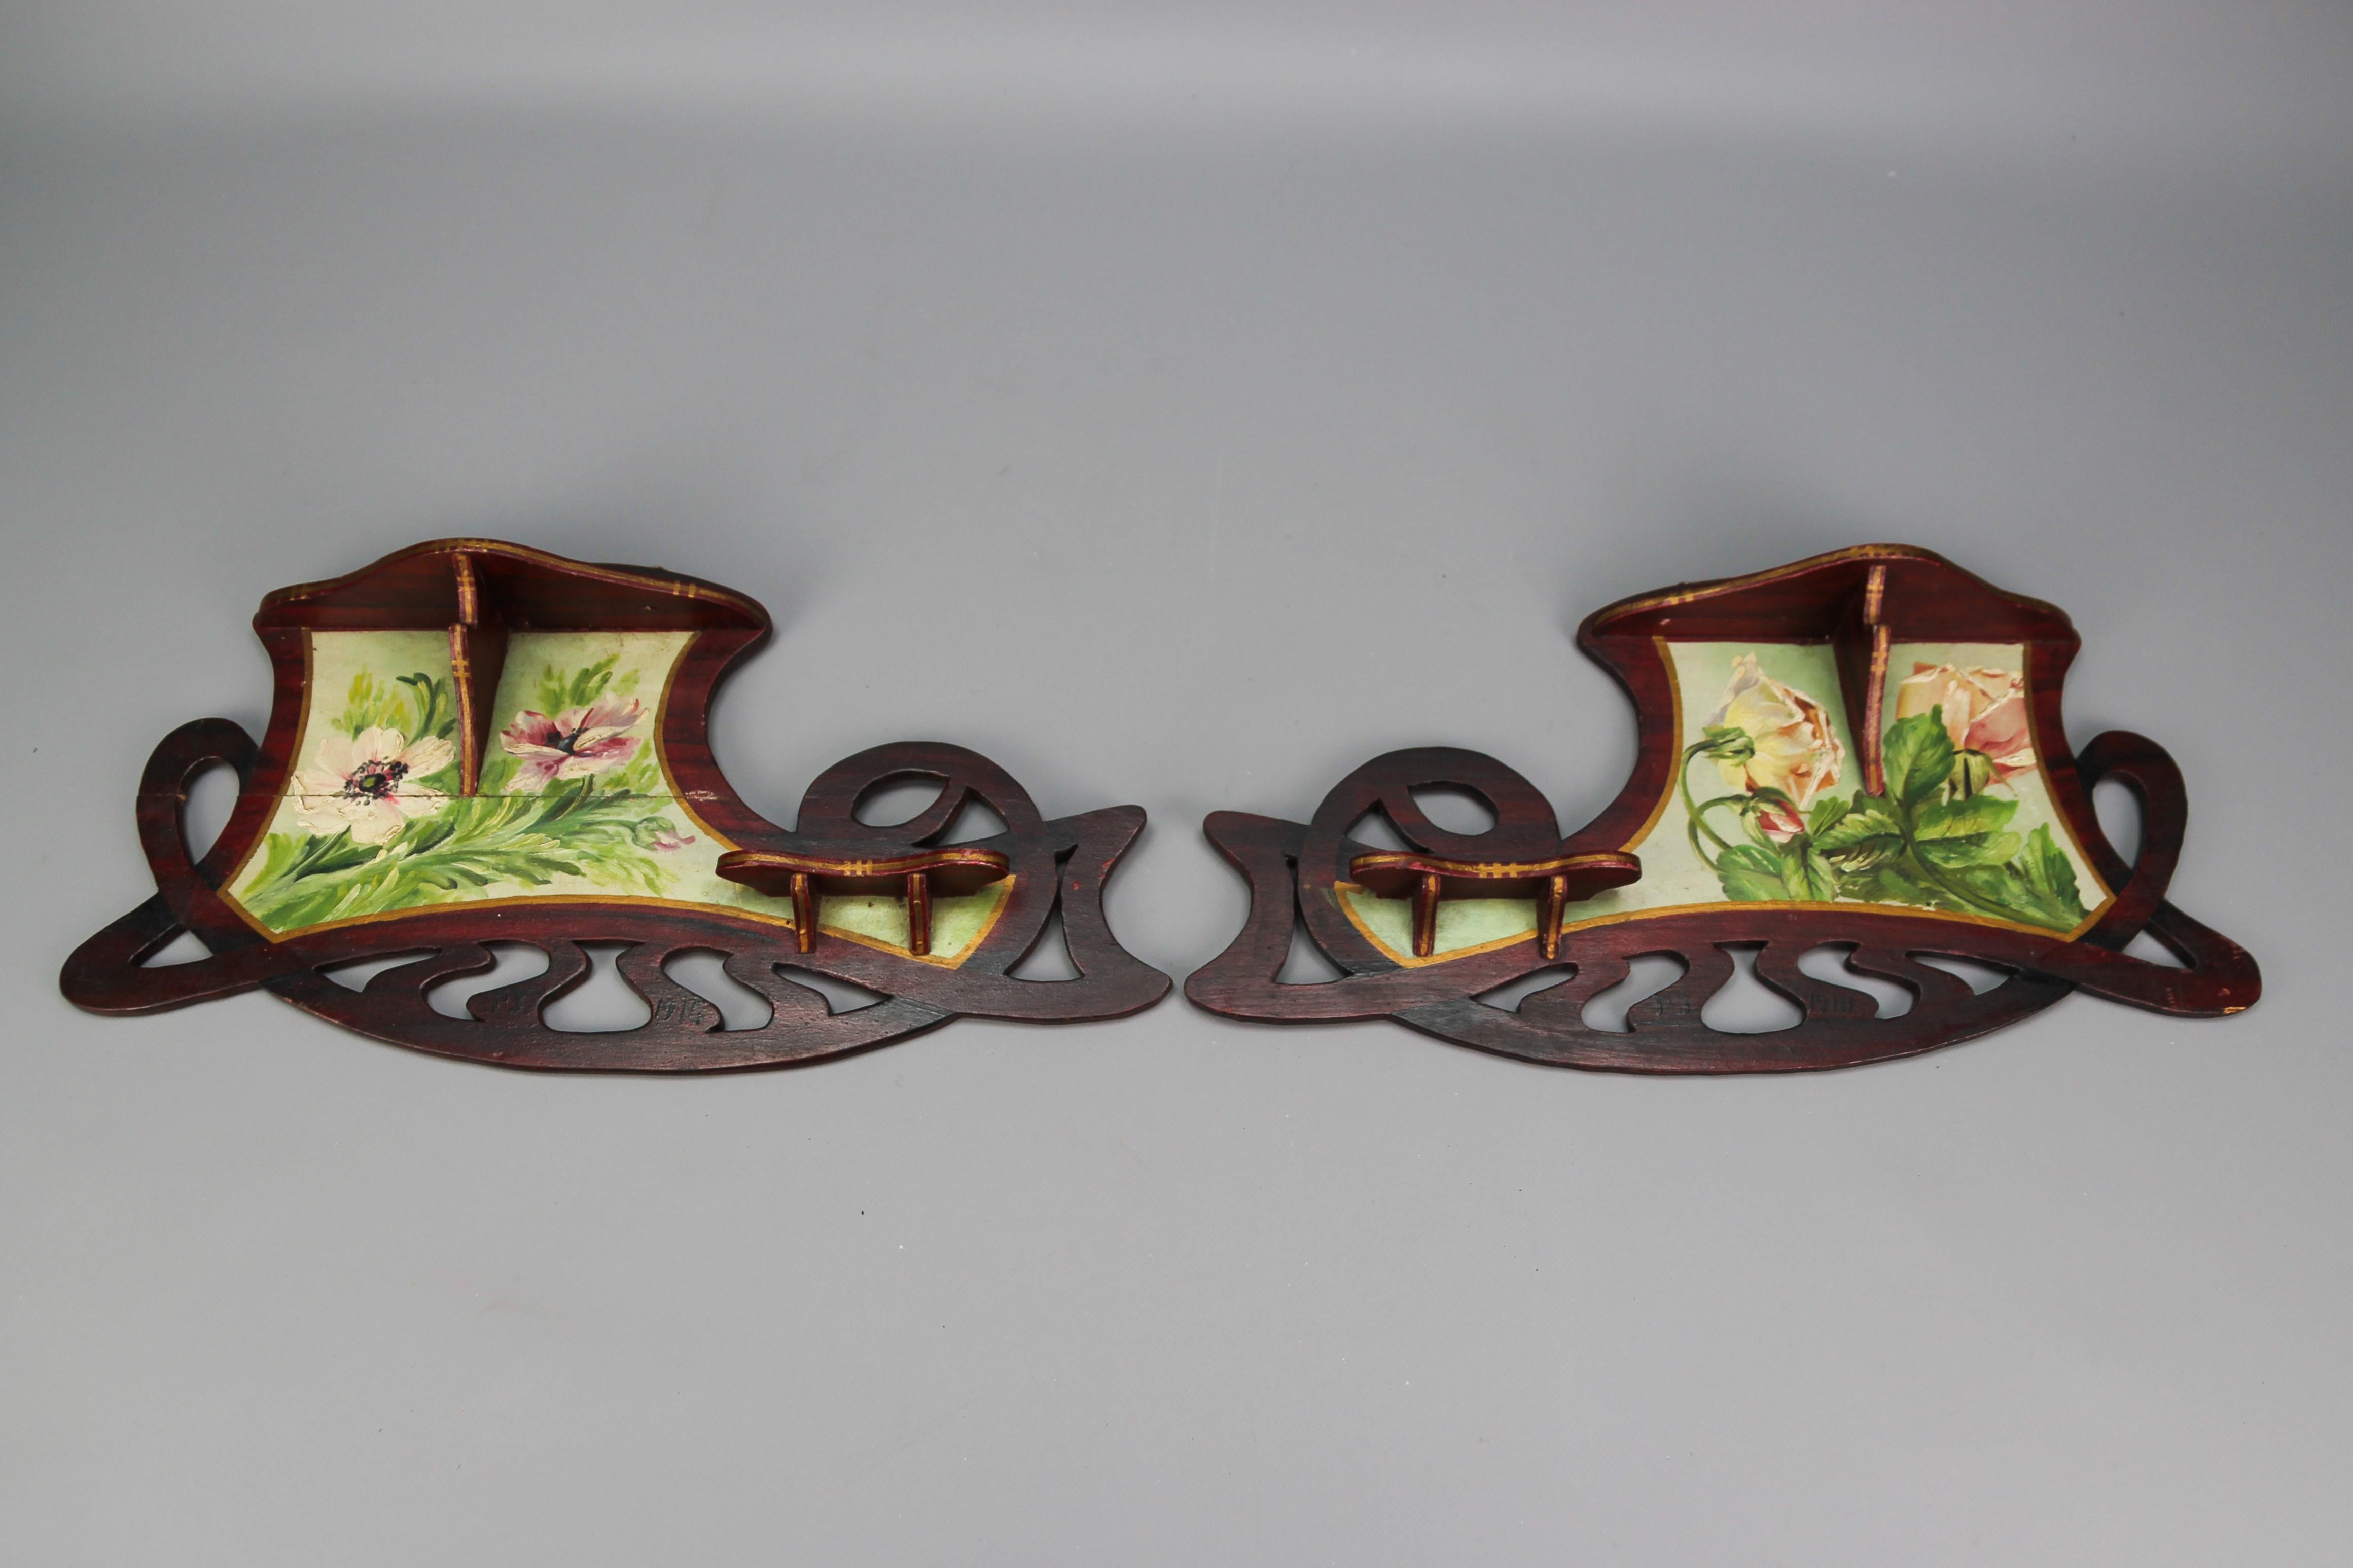 Pair of Art Nouveau wooden hand-painted floral shelves, Germany, 1910.
A beautiful pair of antique Art Nouveau period wooden shelves/consoles with hand-painted floral decors. These adorable shelves are made of pine wood, colored in dark brown, and